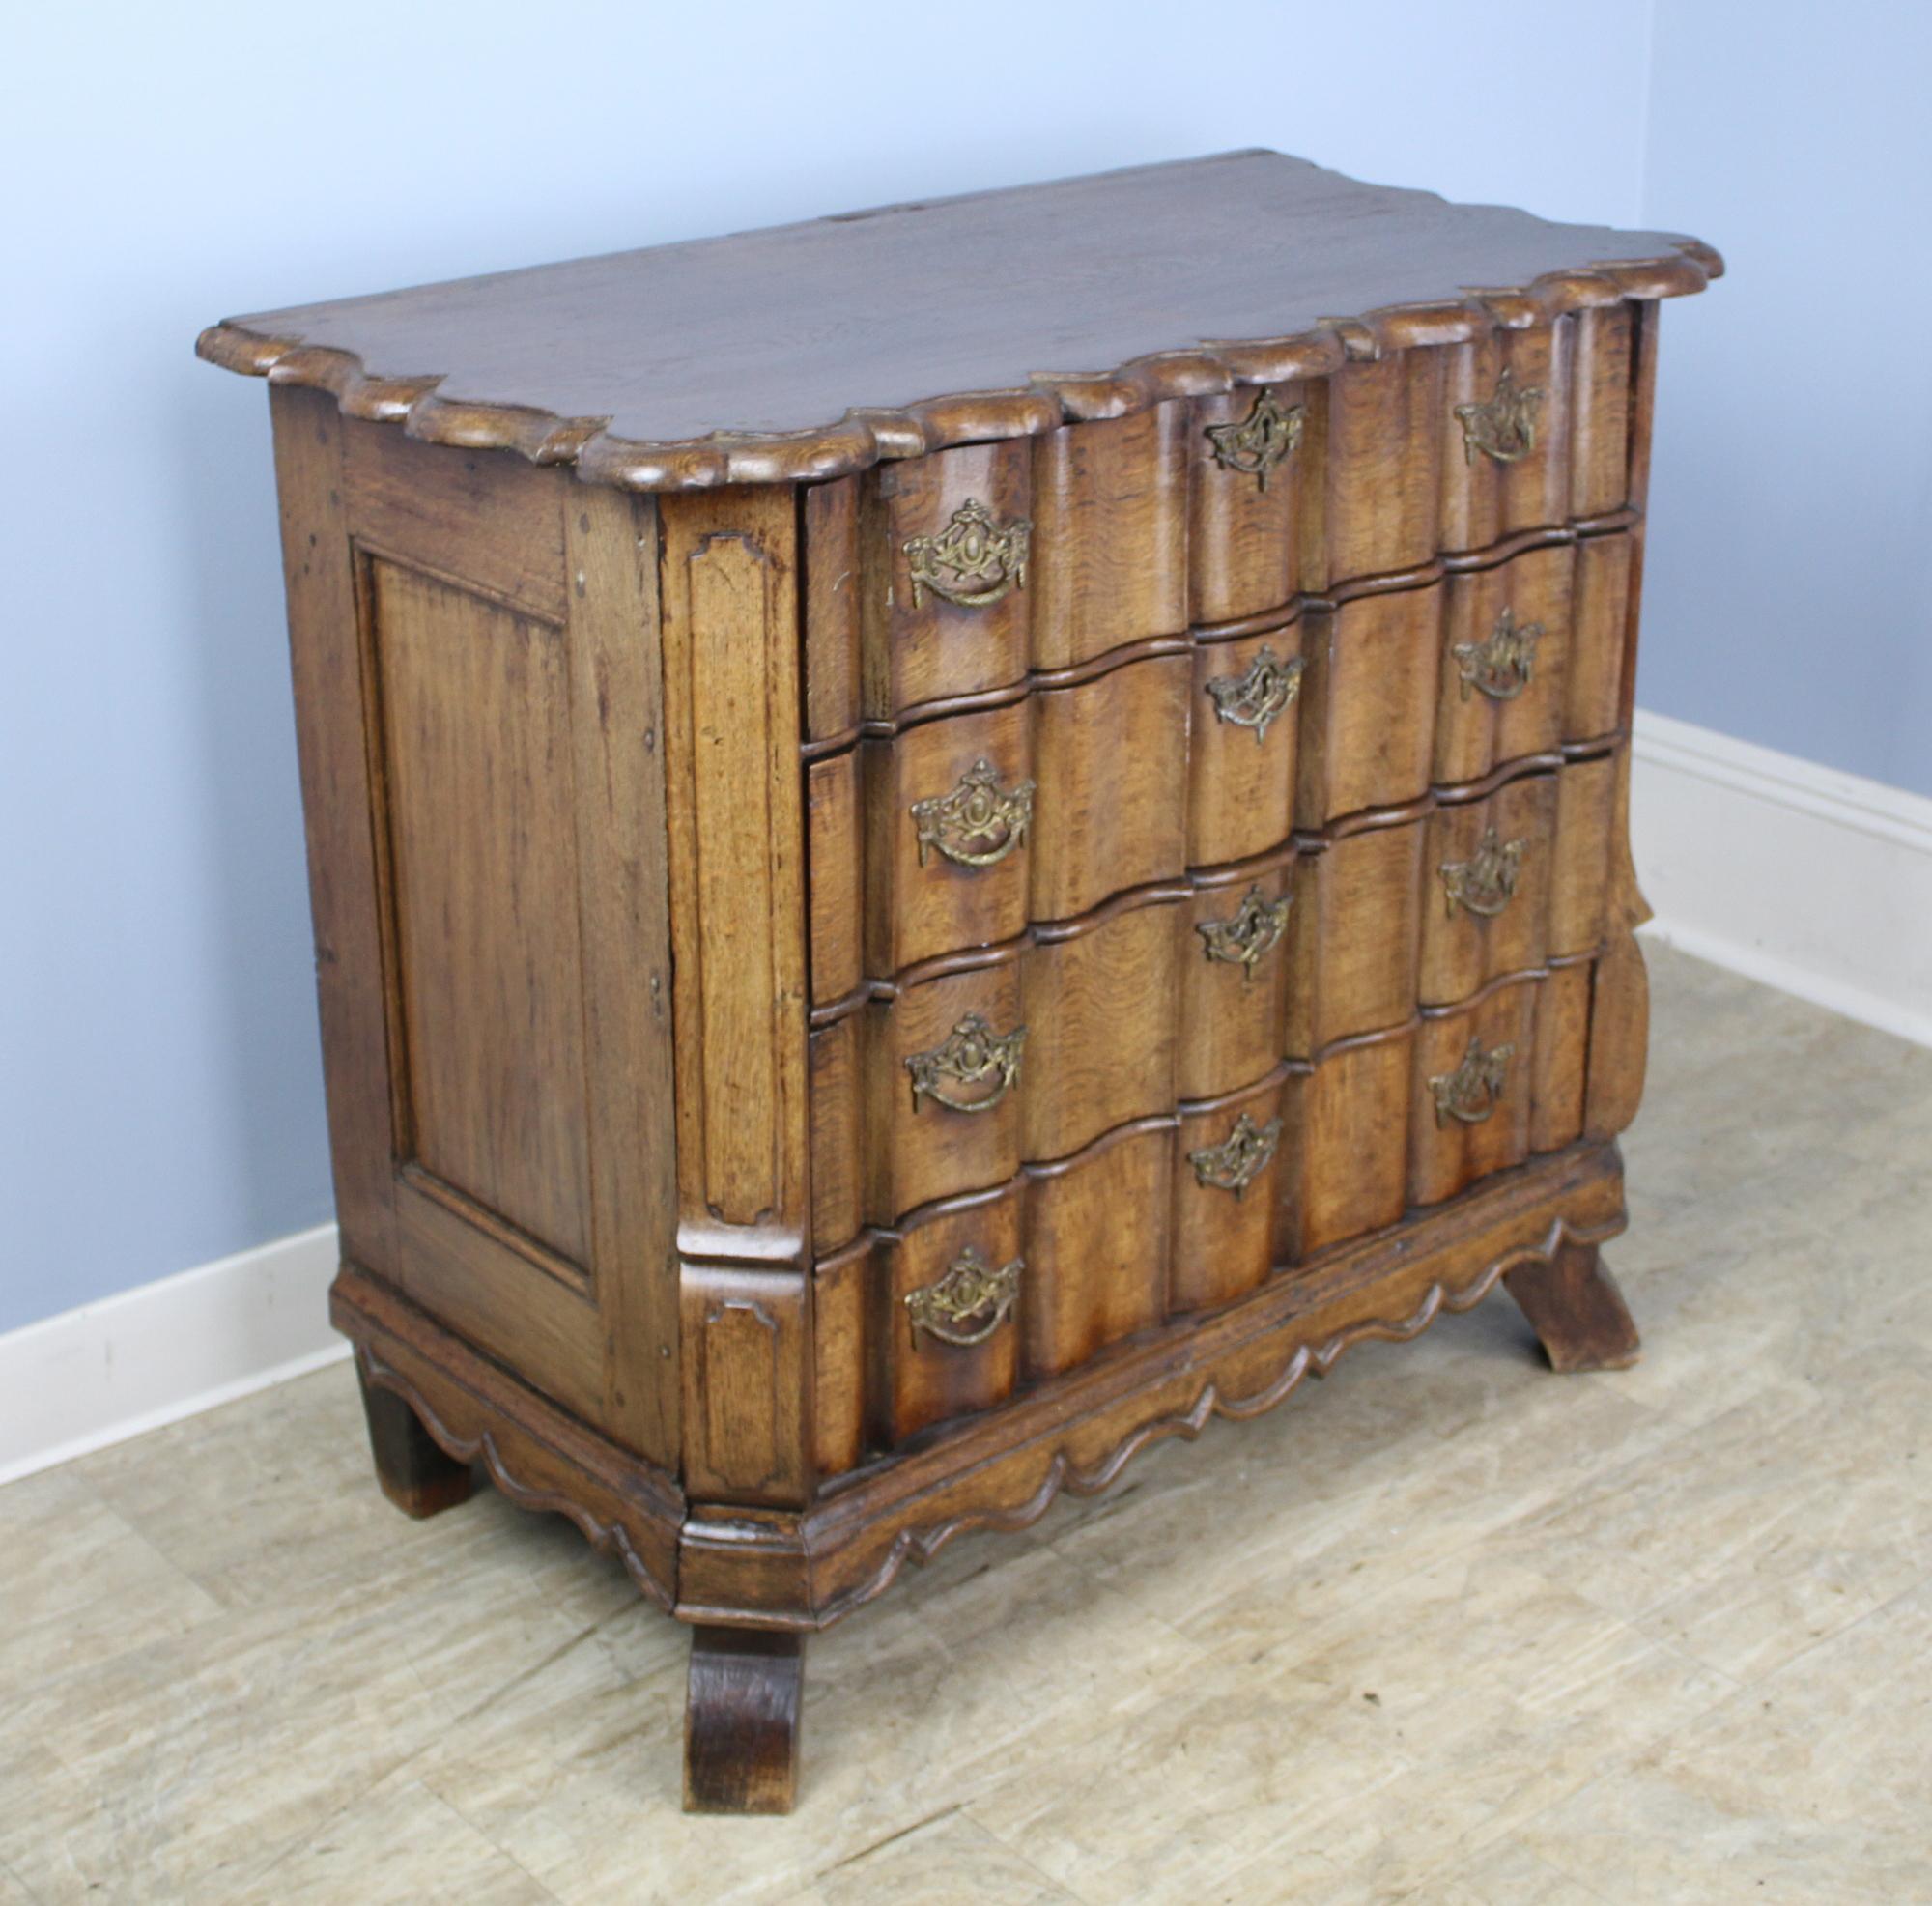 A glowing Dutch oak chest, with serpentine drawers and original brasses, circa 1780. Classic scalloped top and apron, plus splayed feet complete the look. Drawers are clean and slide very easily for a piece of this age. Elegant and imposing.